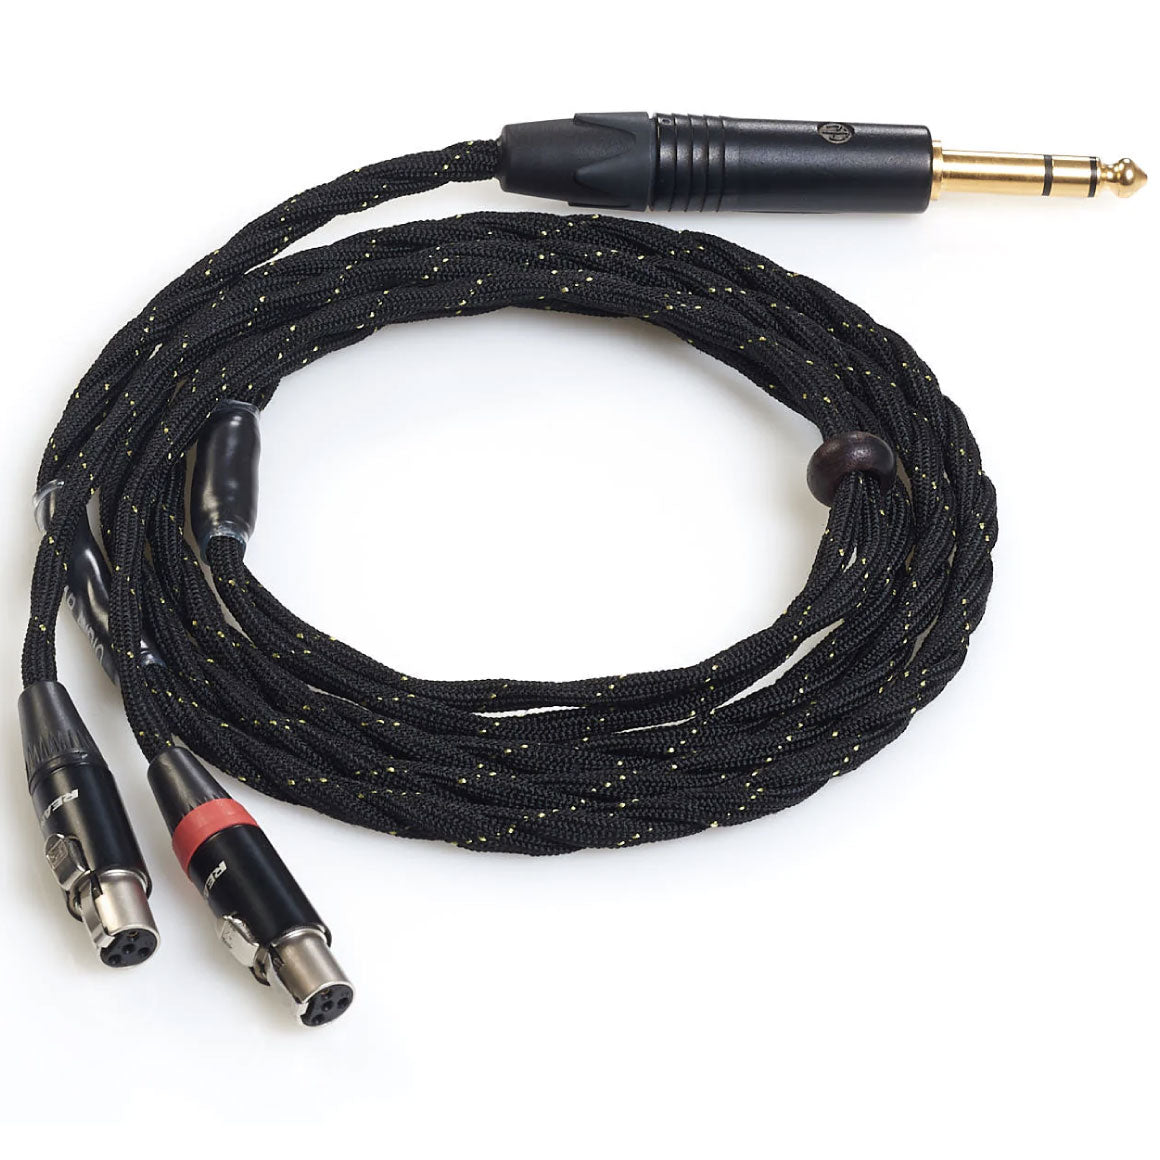 Headgear Audio - Audeze LCD-2, LCD-3, LCD-4, LCD-X, LCD-XC Headphone Replacement Cable